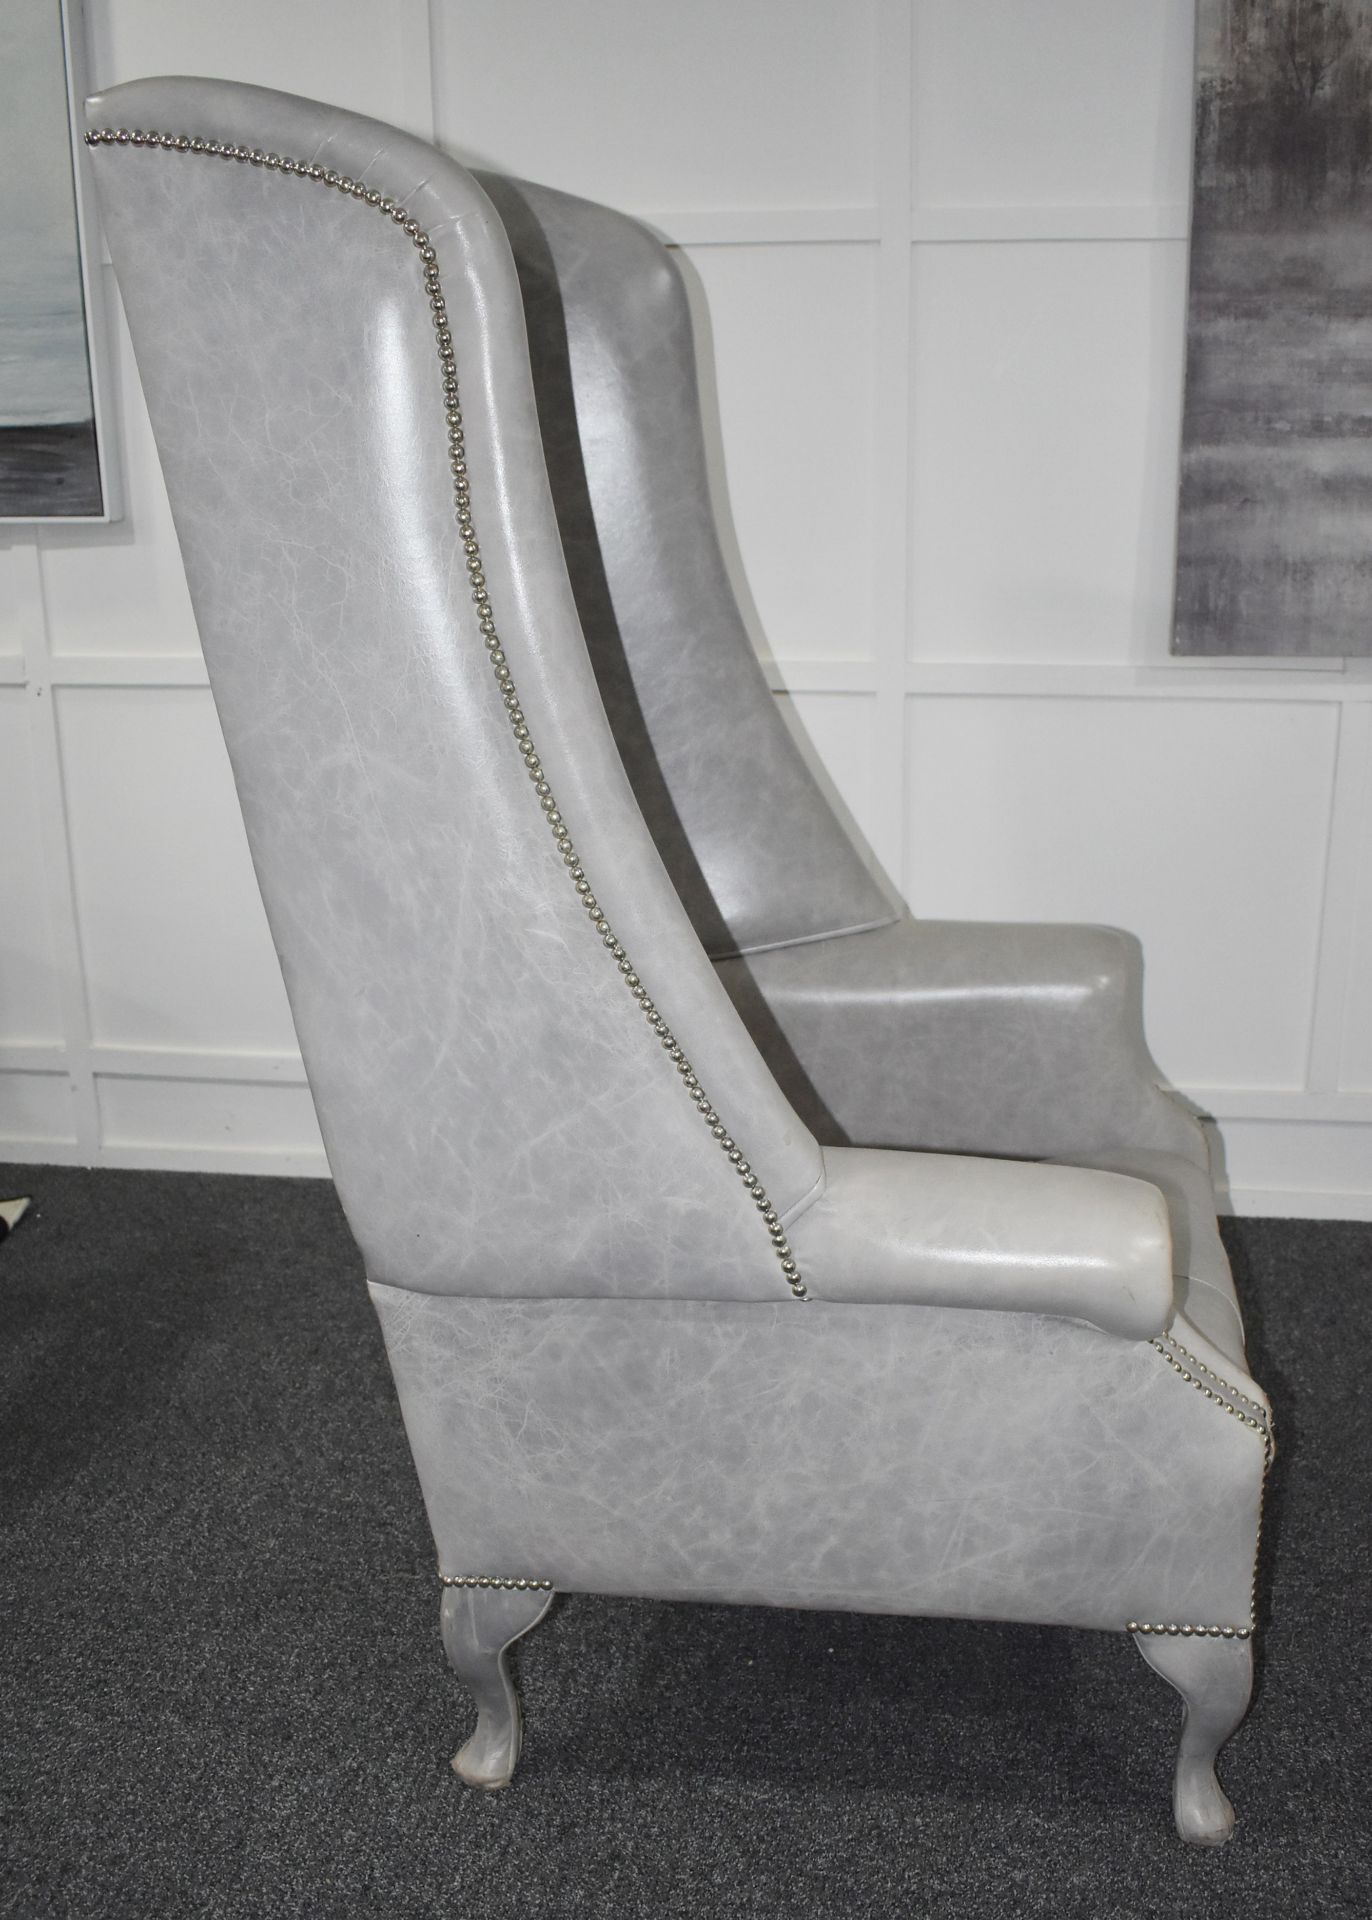 1 x Buttoned Leather Upholsteterd High-back Armchair in Light Grey - Luxury Furniture Showroom - Image 3 of 7